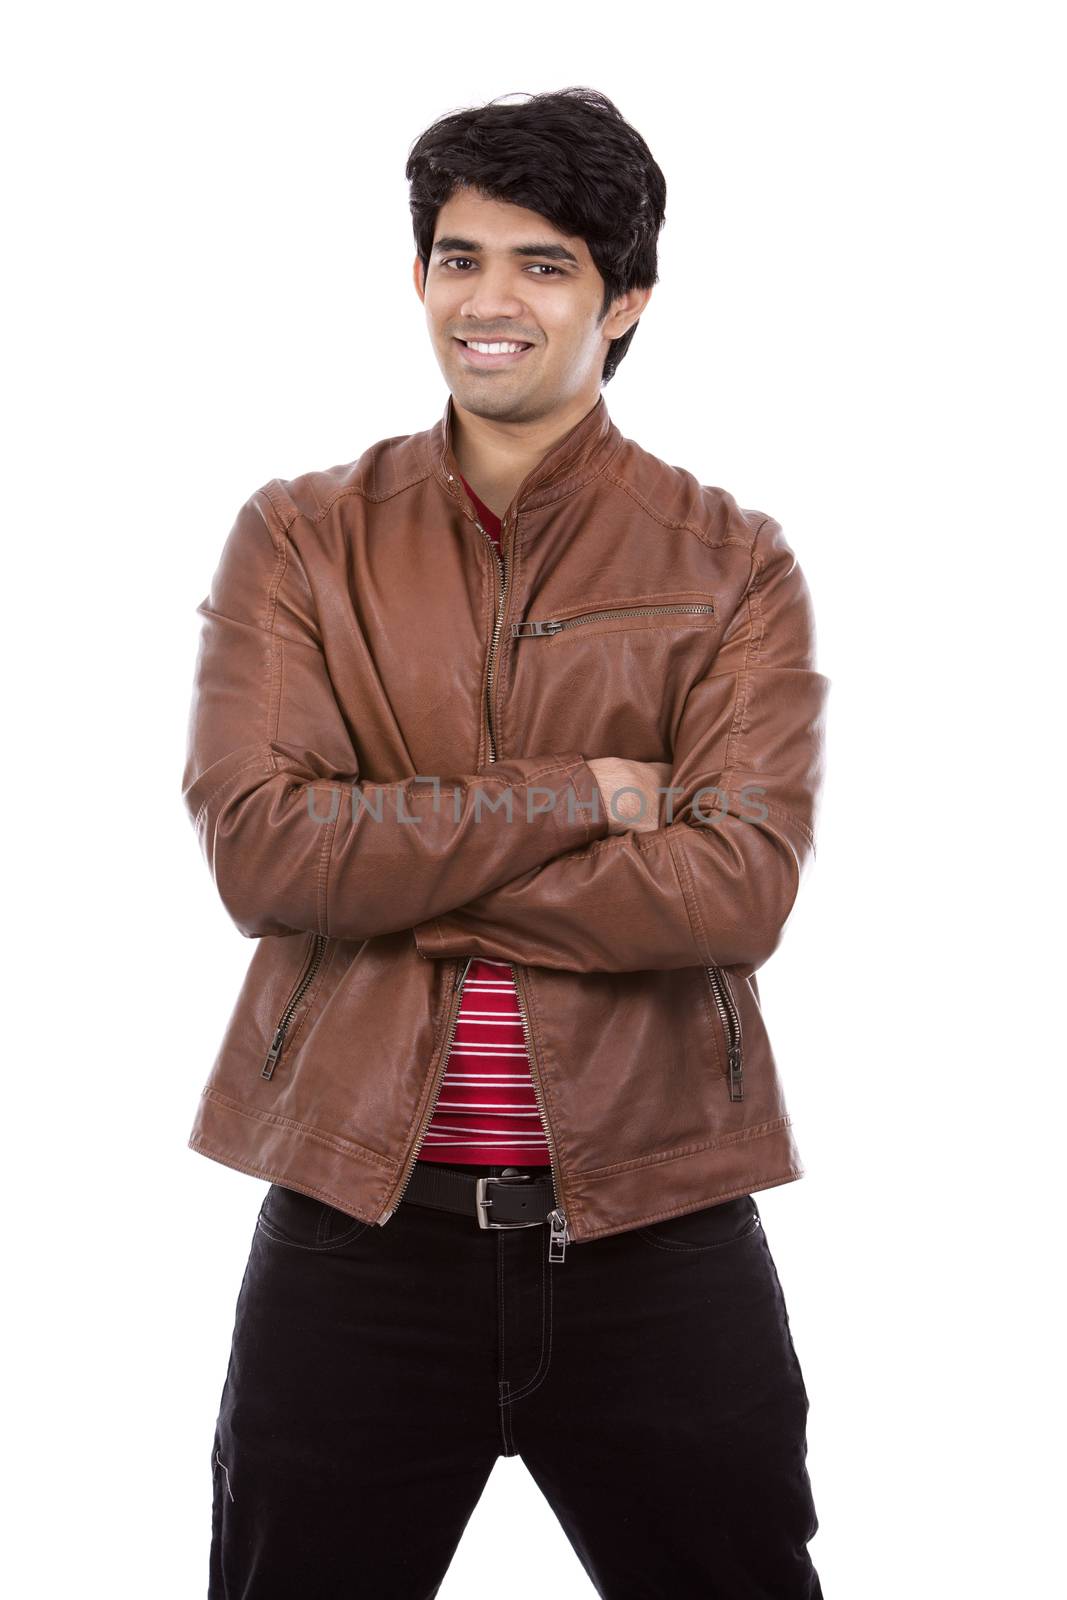 handsome east indian man wearing red shirt on white isolated background